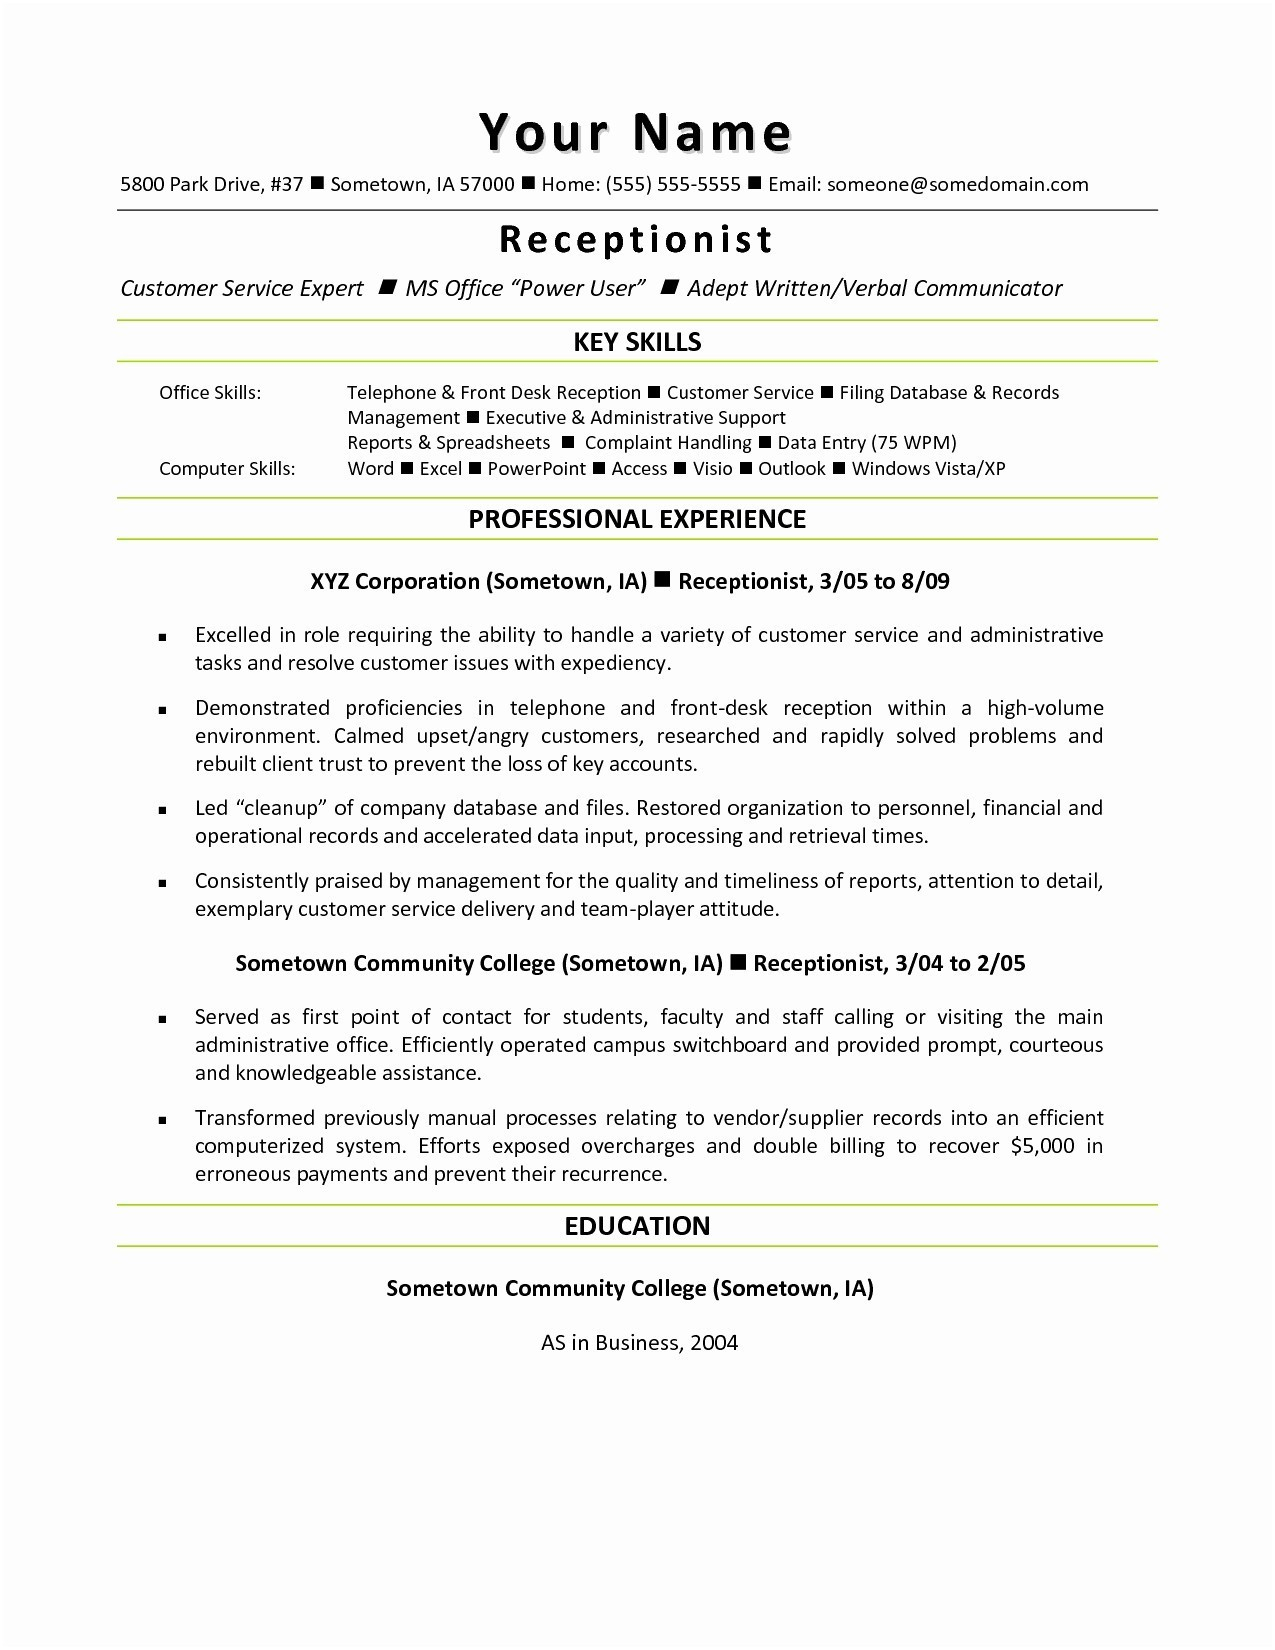 Free Cover Letter Template Word - Resume Microsoft Word Fresh Resume Mail format Sample Fresh